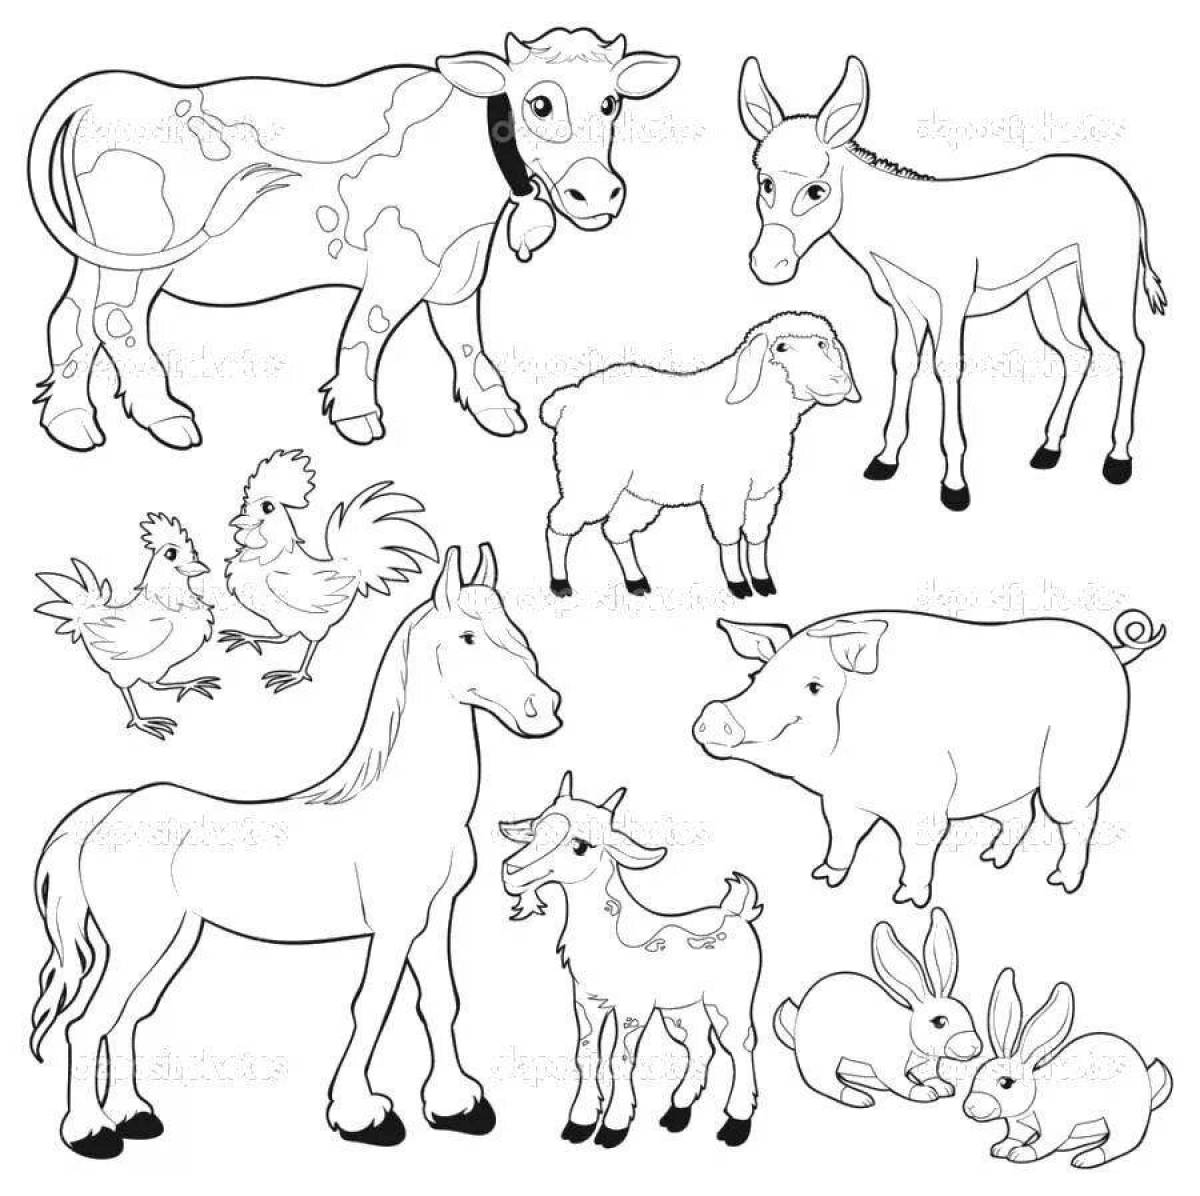 Cute animal coloring pages for preschoolers